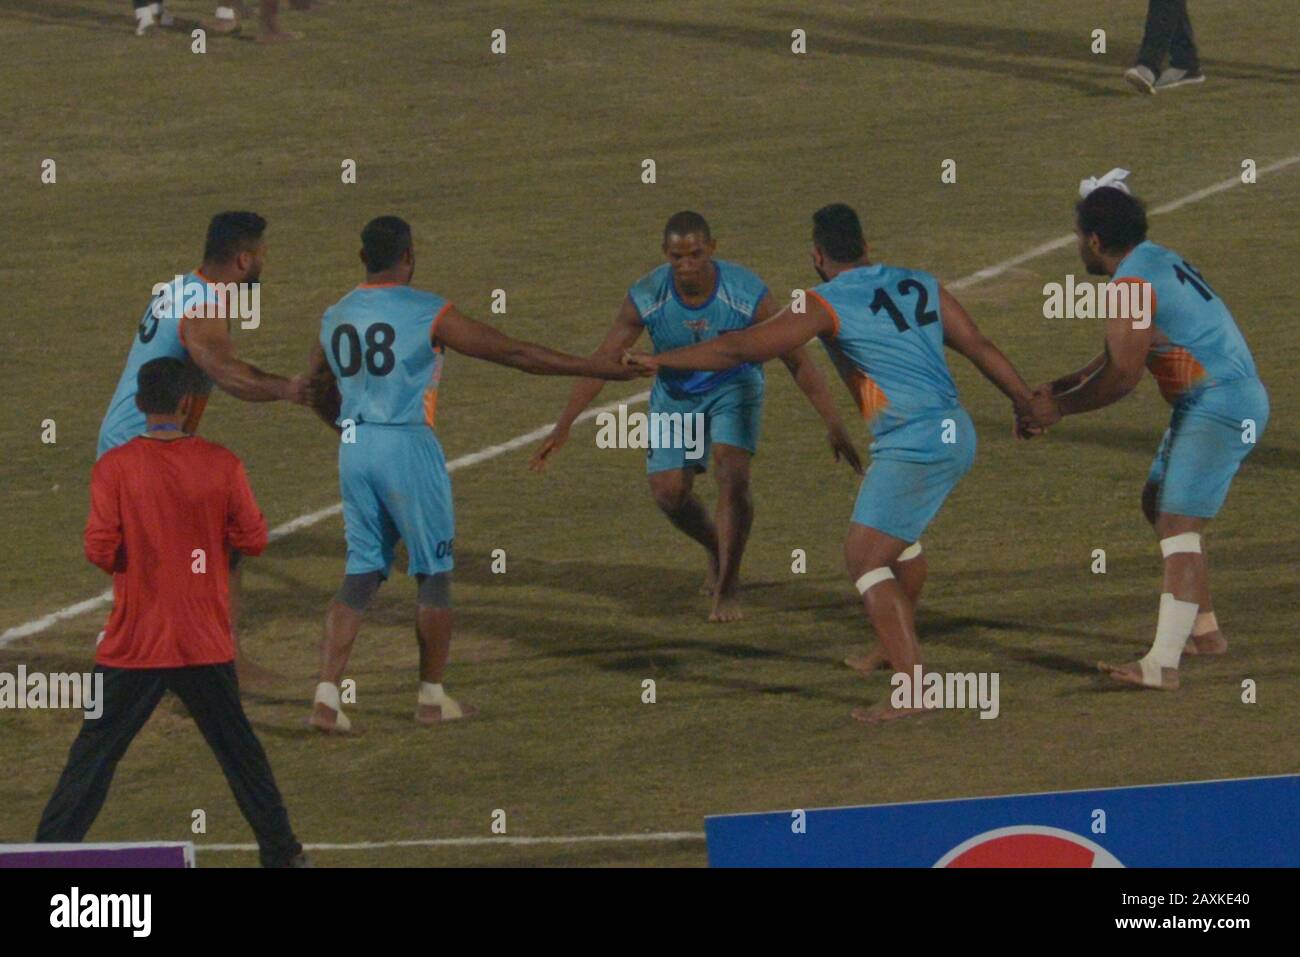 Kabaddi players seem in action during the match playing between India vs Sierra Leone, as Indian Kabaddi team win by 18-45 during Kabaddi World Cup 2020 at Punjab Stadium Lahore. Kabaddi World Cup 2020 begins in Pakistan. All is set for the 'Kabaddi World Cup 2020' being hosted in three cities Lahore, Faisalabad and Gujrat from February 09 to 16 February. respectively. The event is jointly organized by Punjab government, Sports Board Punjab (SBP) and Pakistan Kabaddi Federation (PKF). (Photo by Rana Sajid Hussain/Pacific Press) Stock Photo